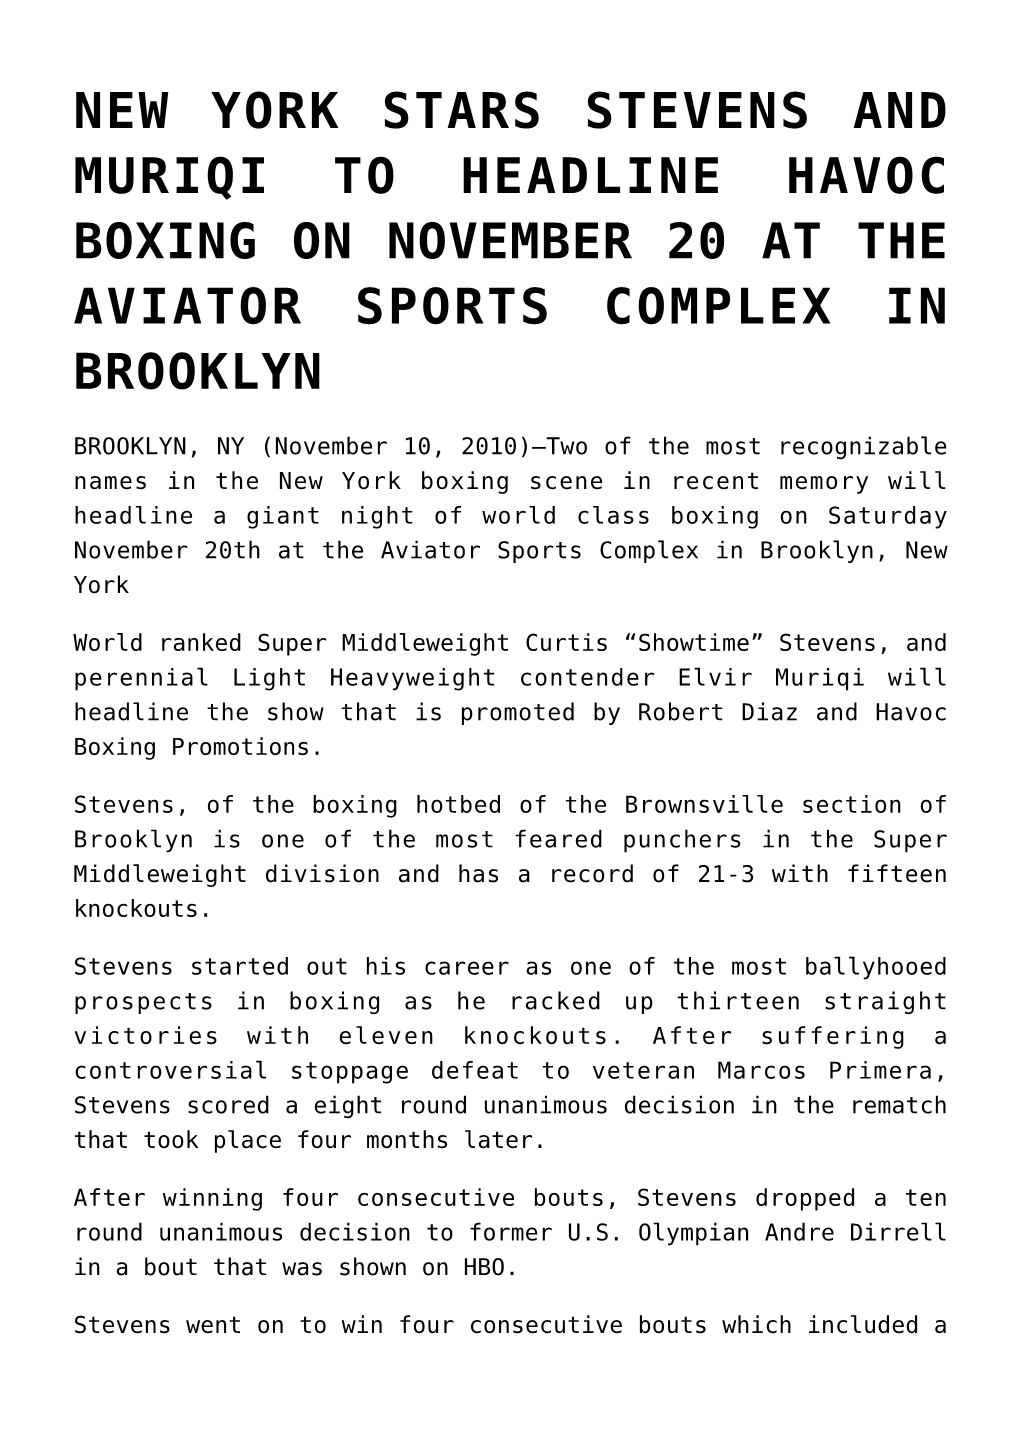 New York Stars Stevens and Muriqi to Headline Havoc Boxing on November 20 at the Aviator Sports Complex in Brooklyn